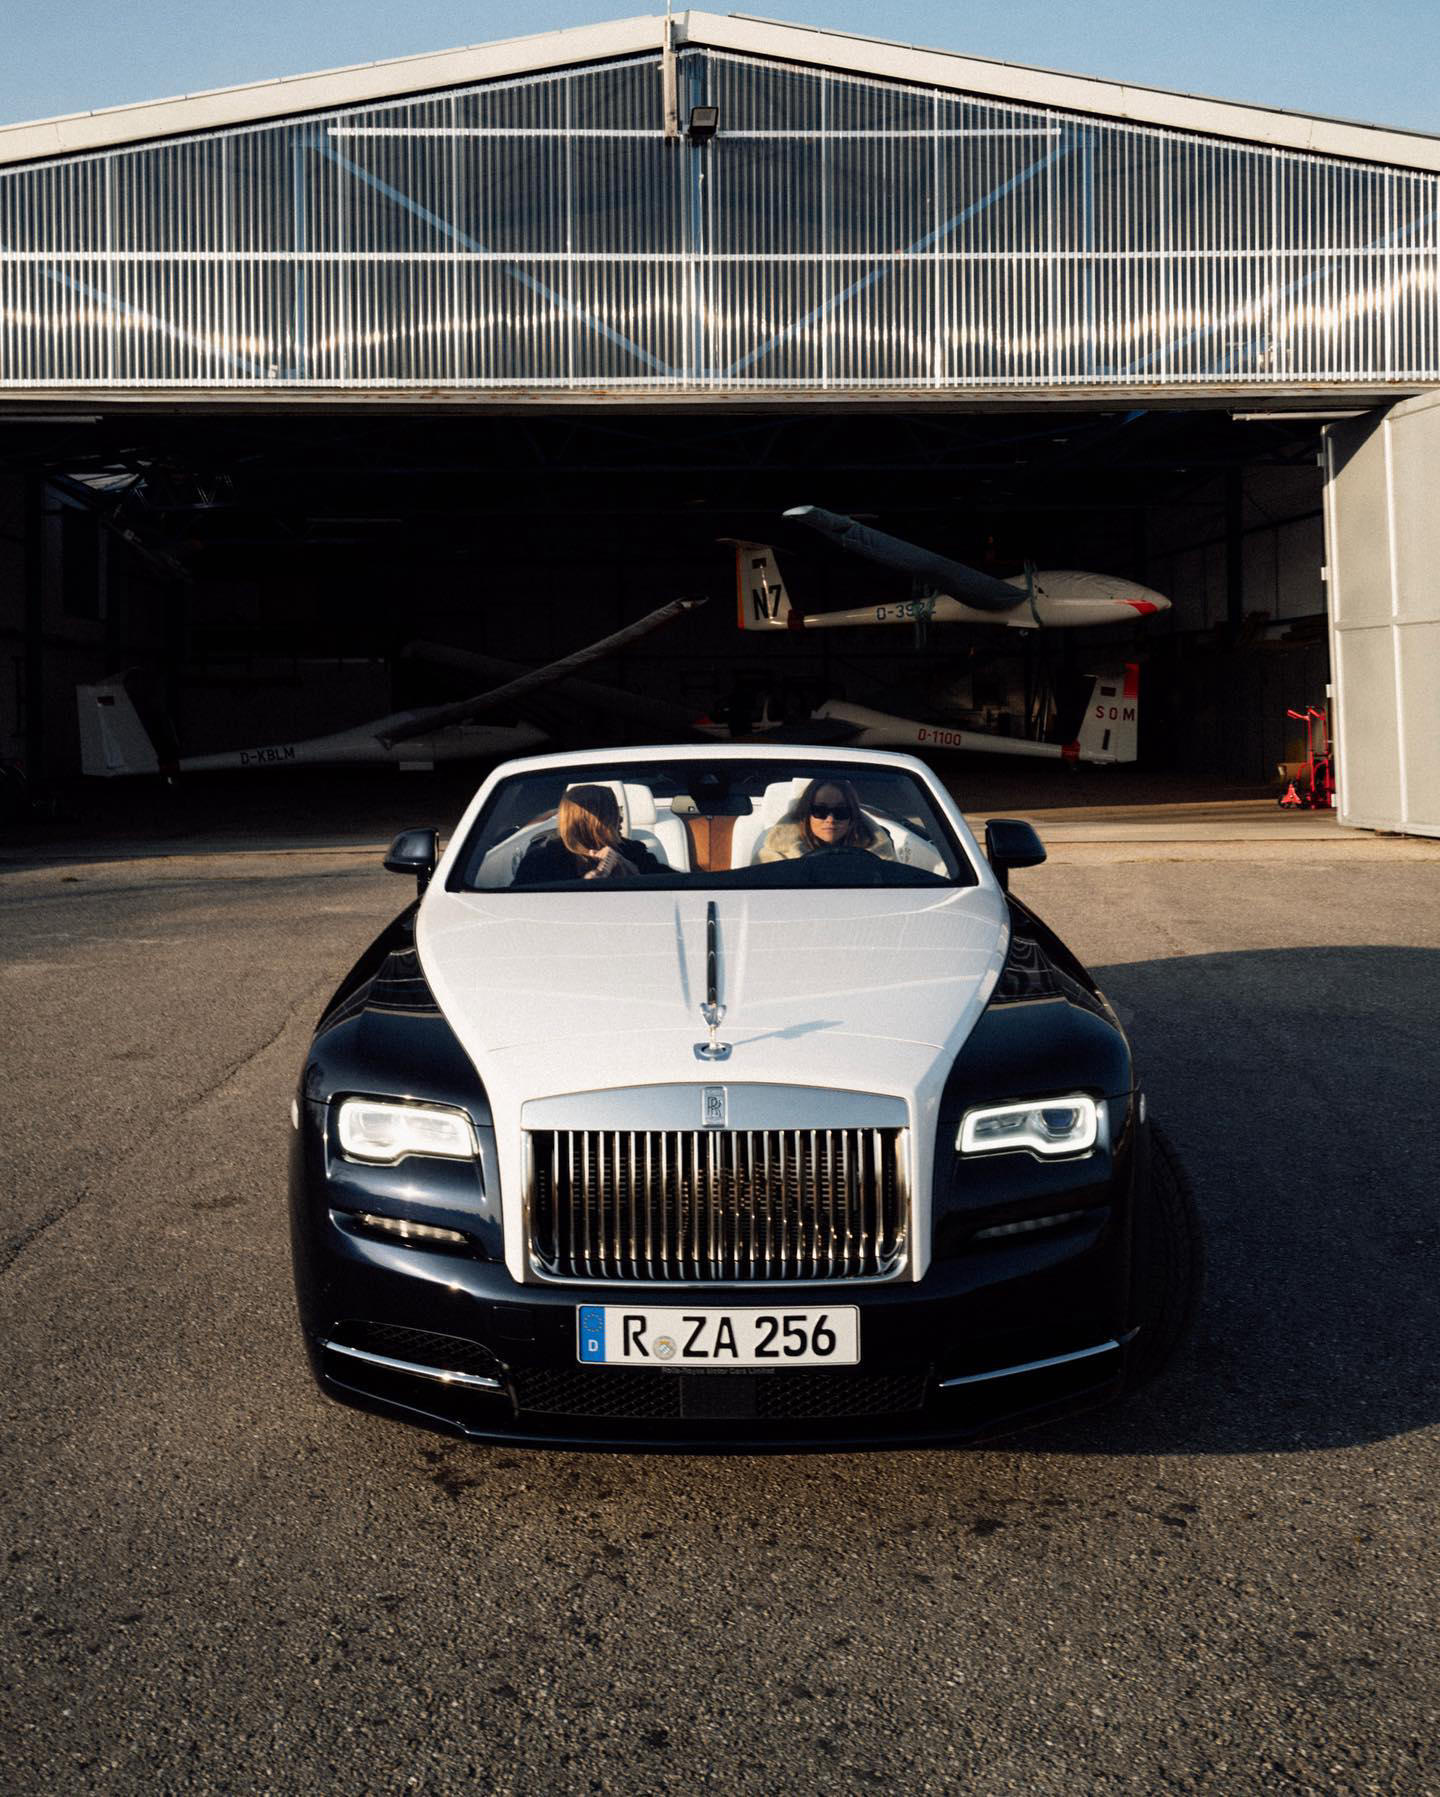 image  1 Rolls-Royce Motor Cars - Ascend to extraordinary heights with Dawn — a drophead coupé made for the f